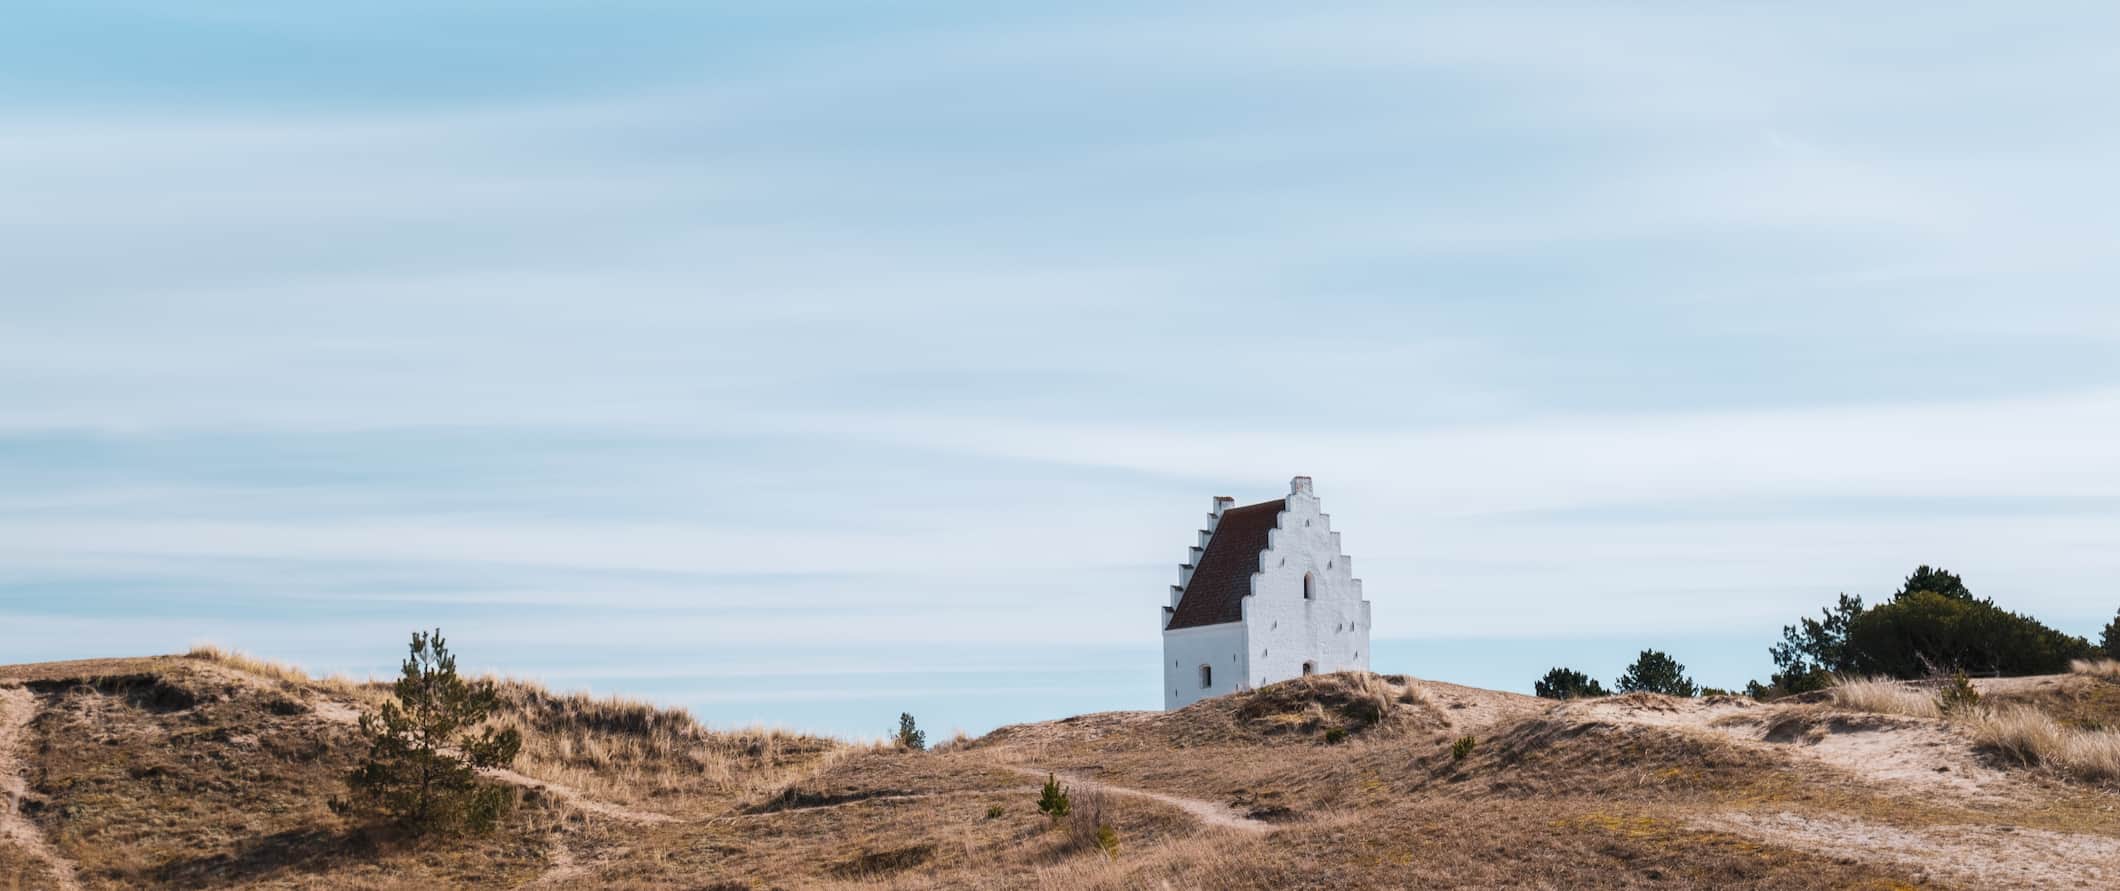 A small, white church on the rugged, wind-blown shores of Jutland in Denmark